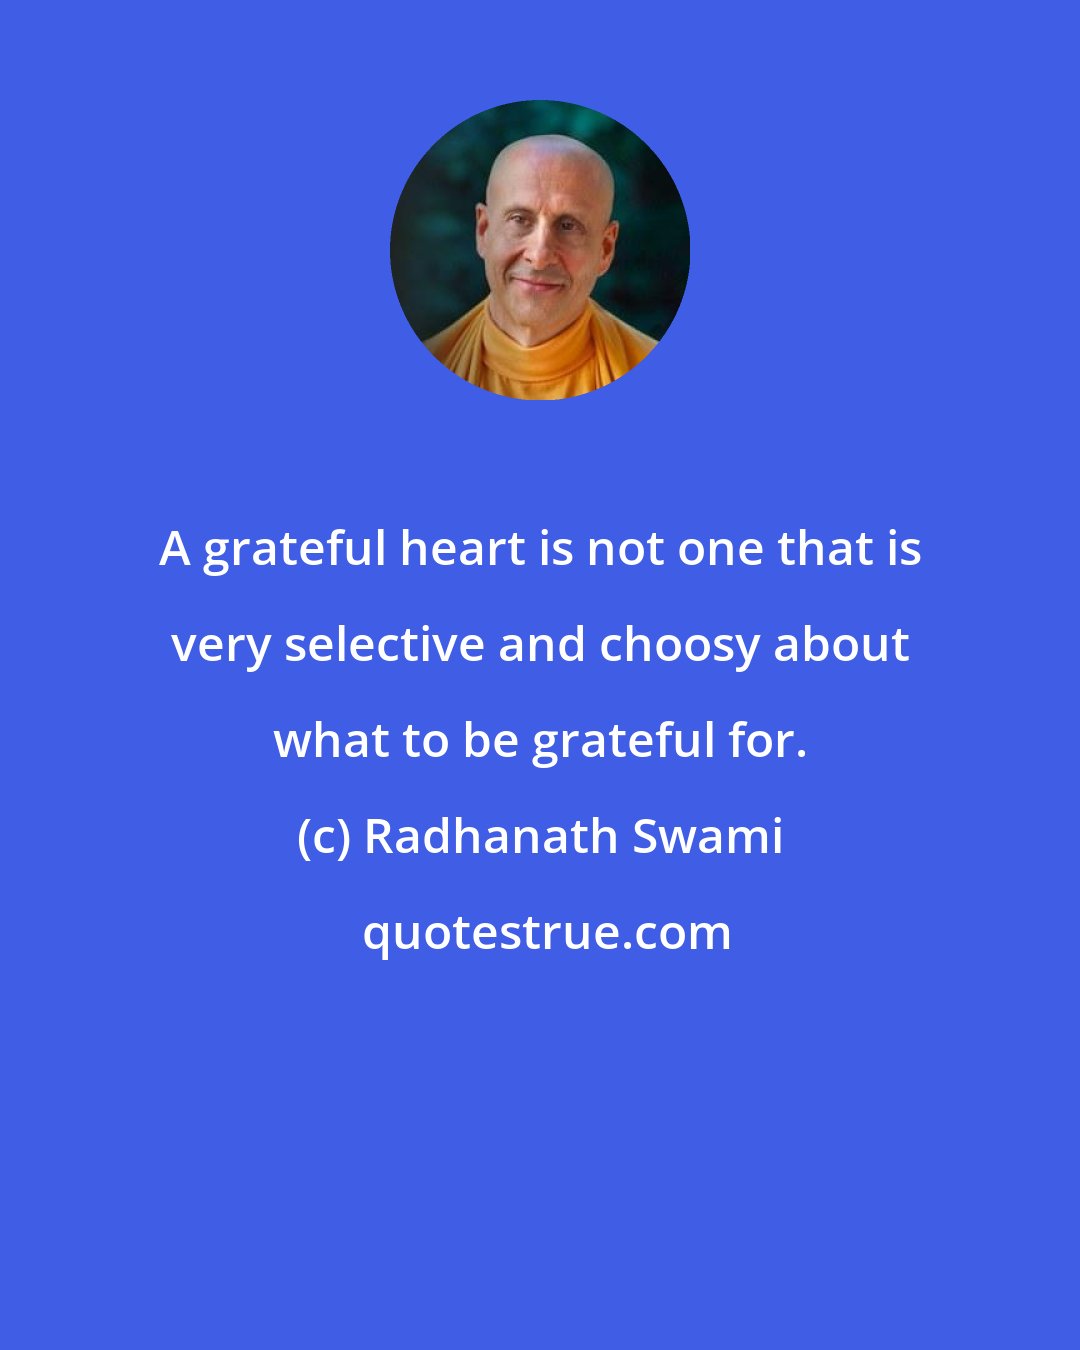 Radhanath Swami: A grateful heart is not one that is very selective and choosy about what to be grateful for.